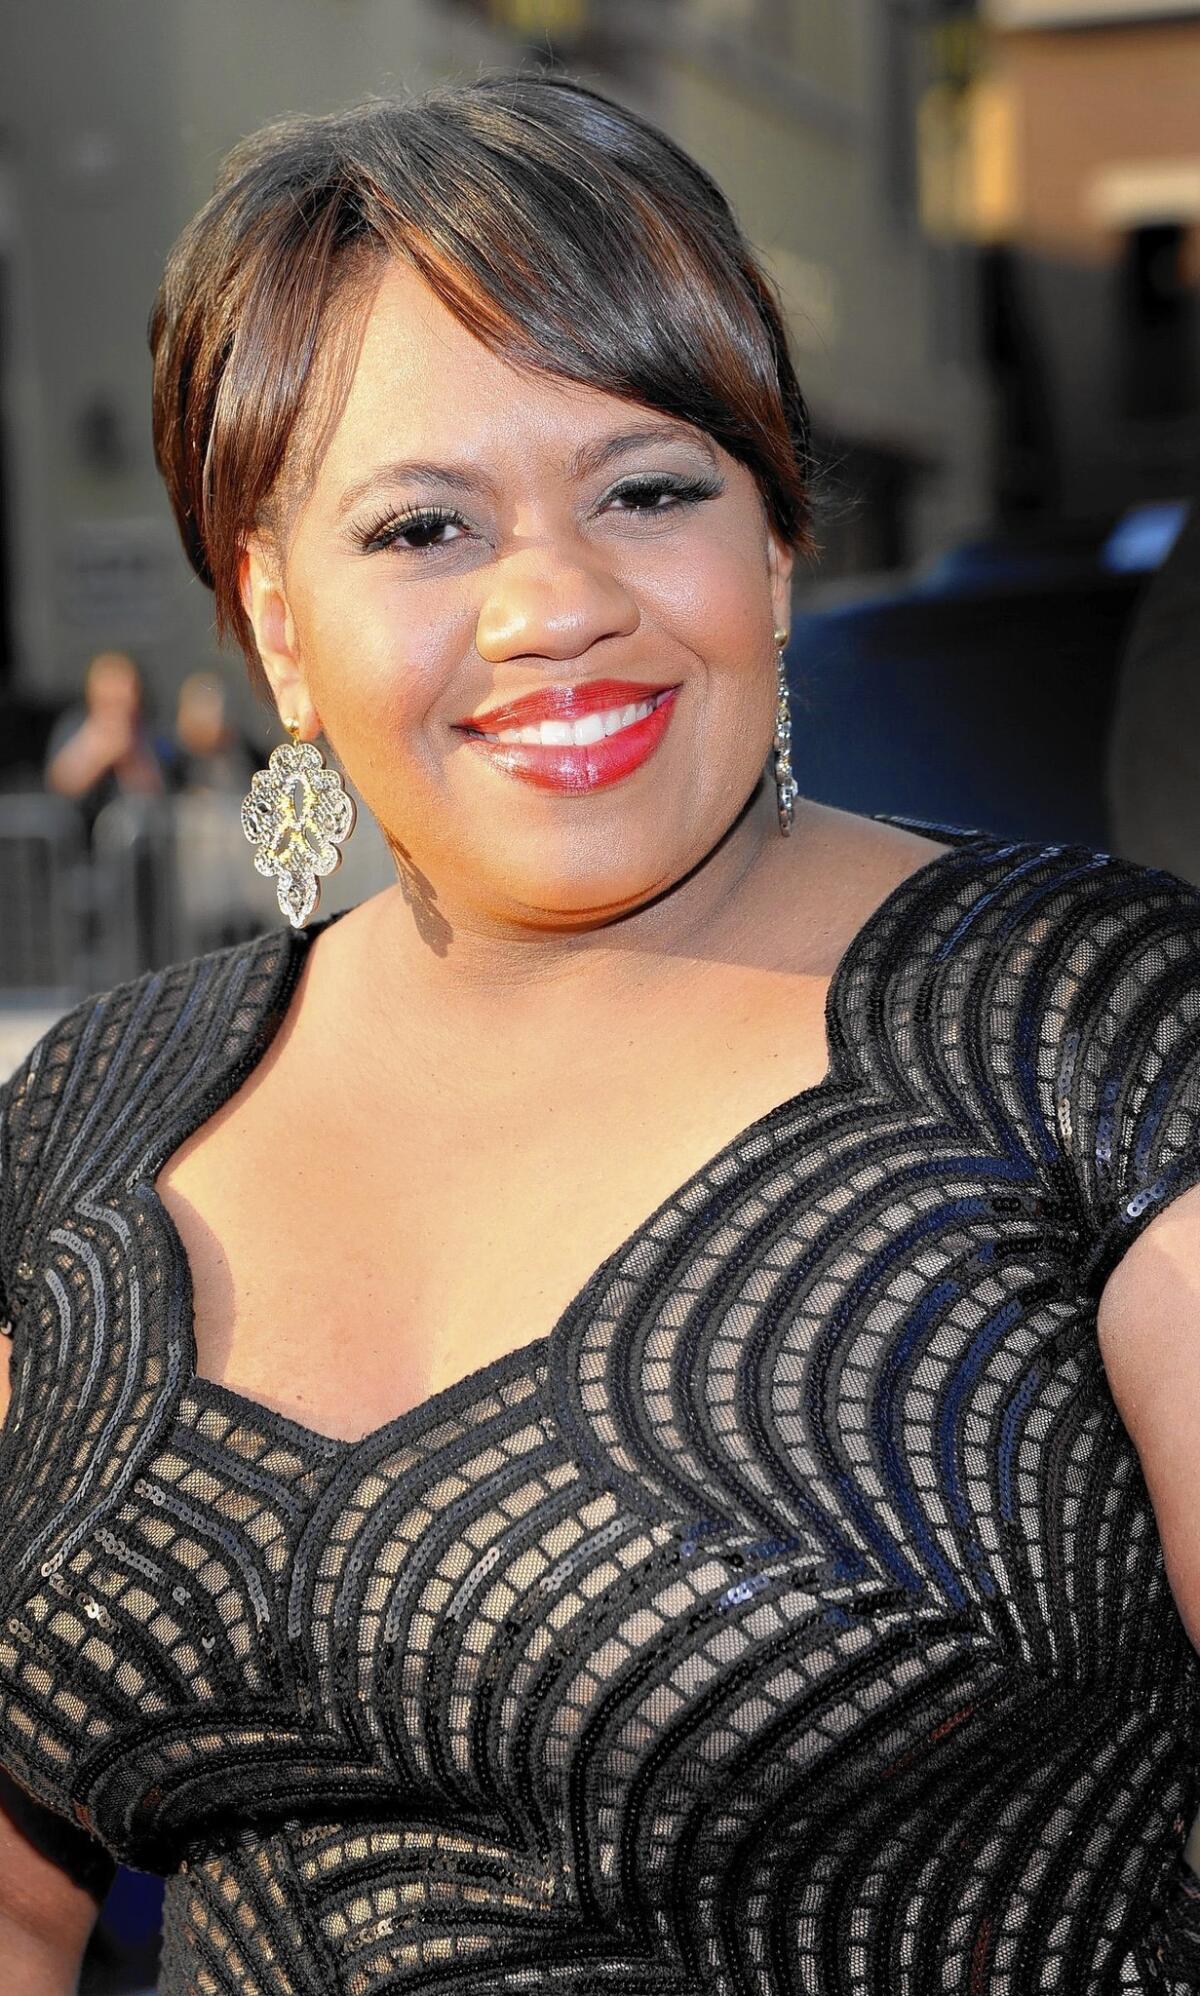 Chandra Wilson, who plays Dr. Miranda Bailey on "Grey's Anatomy," has learned to become a patient advocate since her daughter was affected by mitochondrial disease.